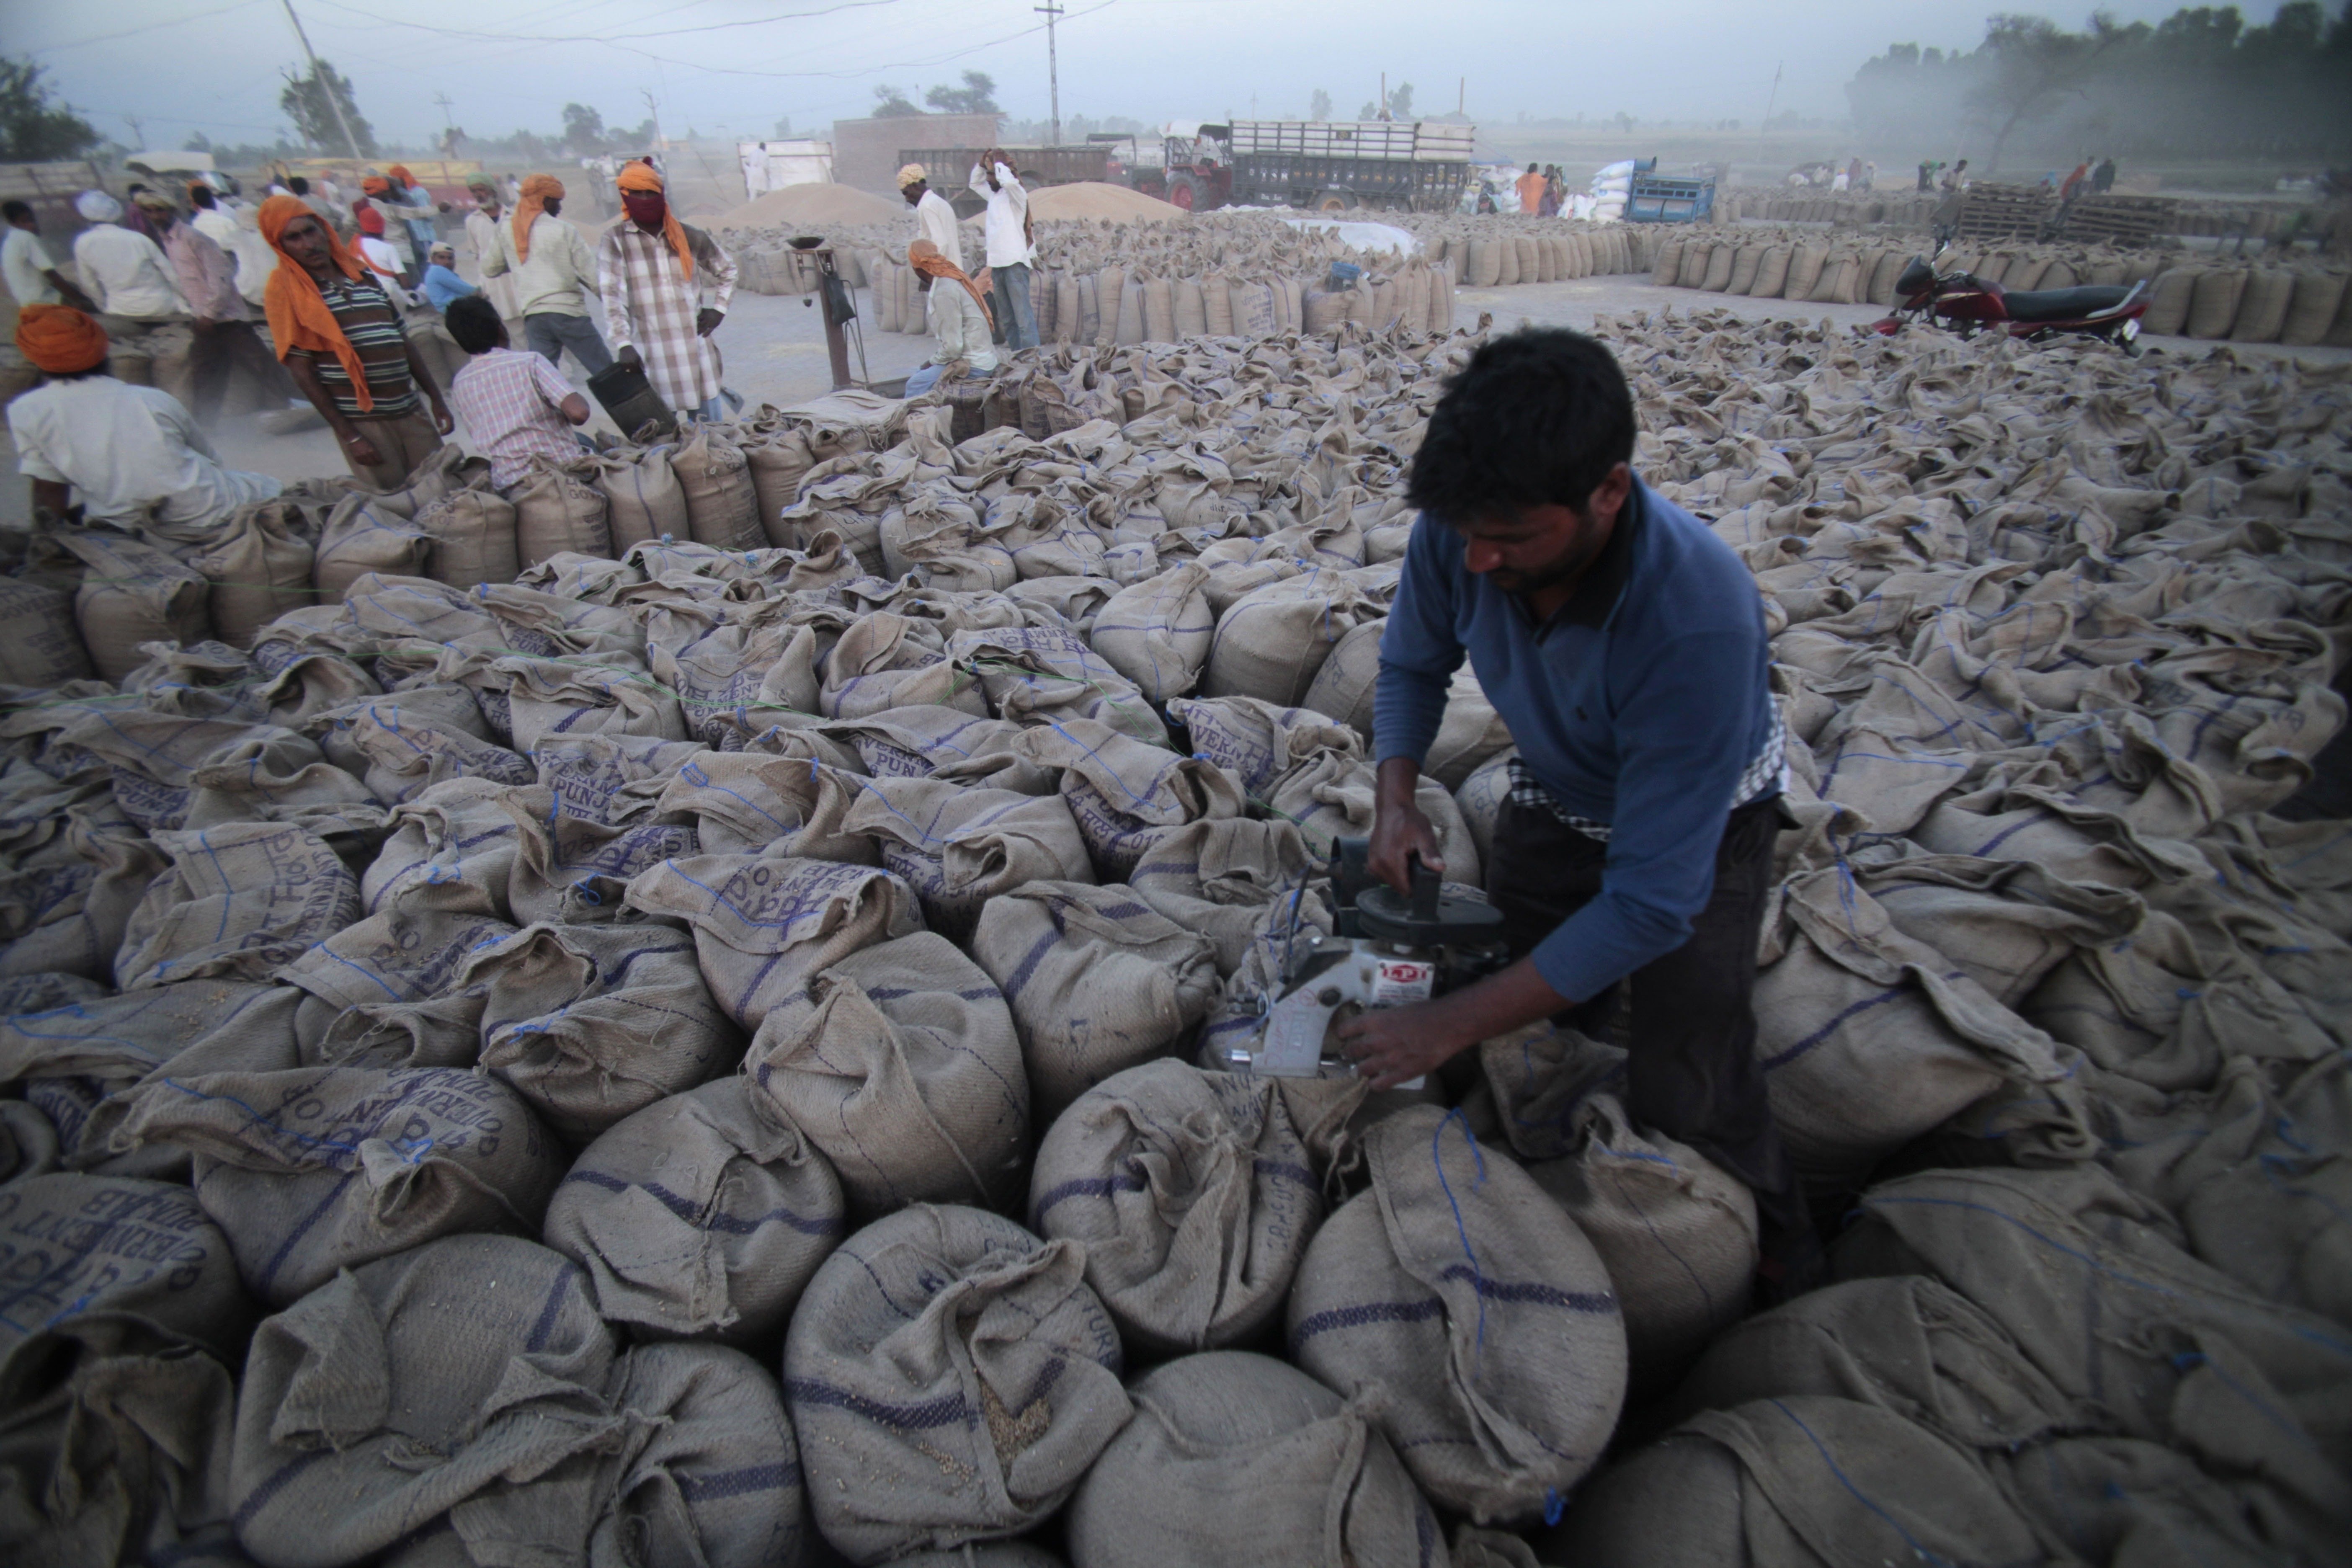 A laborer seals sacks filled with wheat in Gurdaspur, in the northern Indian state of Punjab, April 30, 2014. (AP Photo)